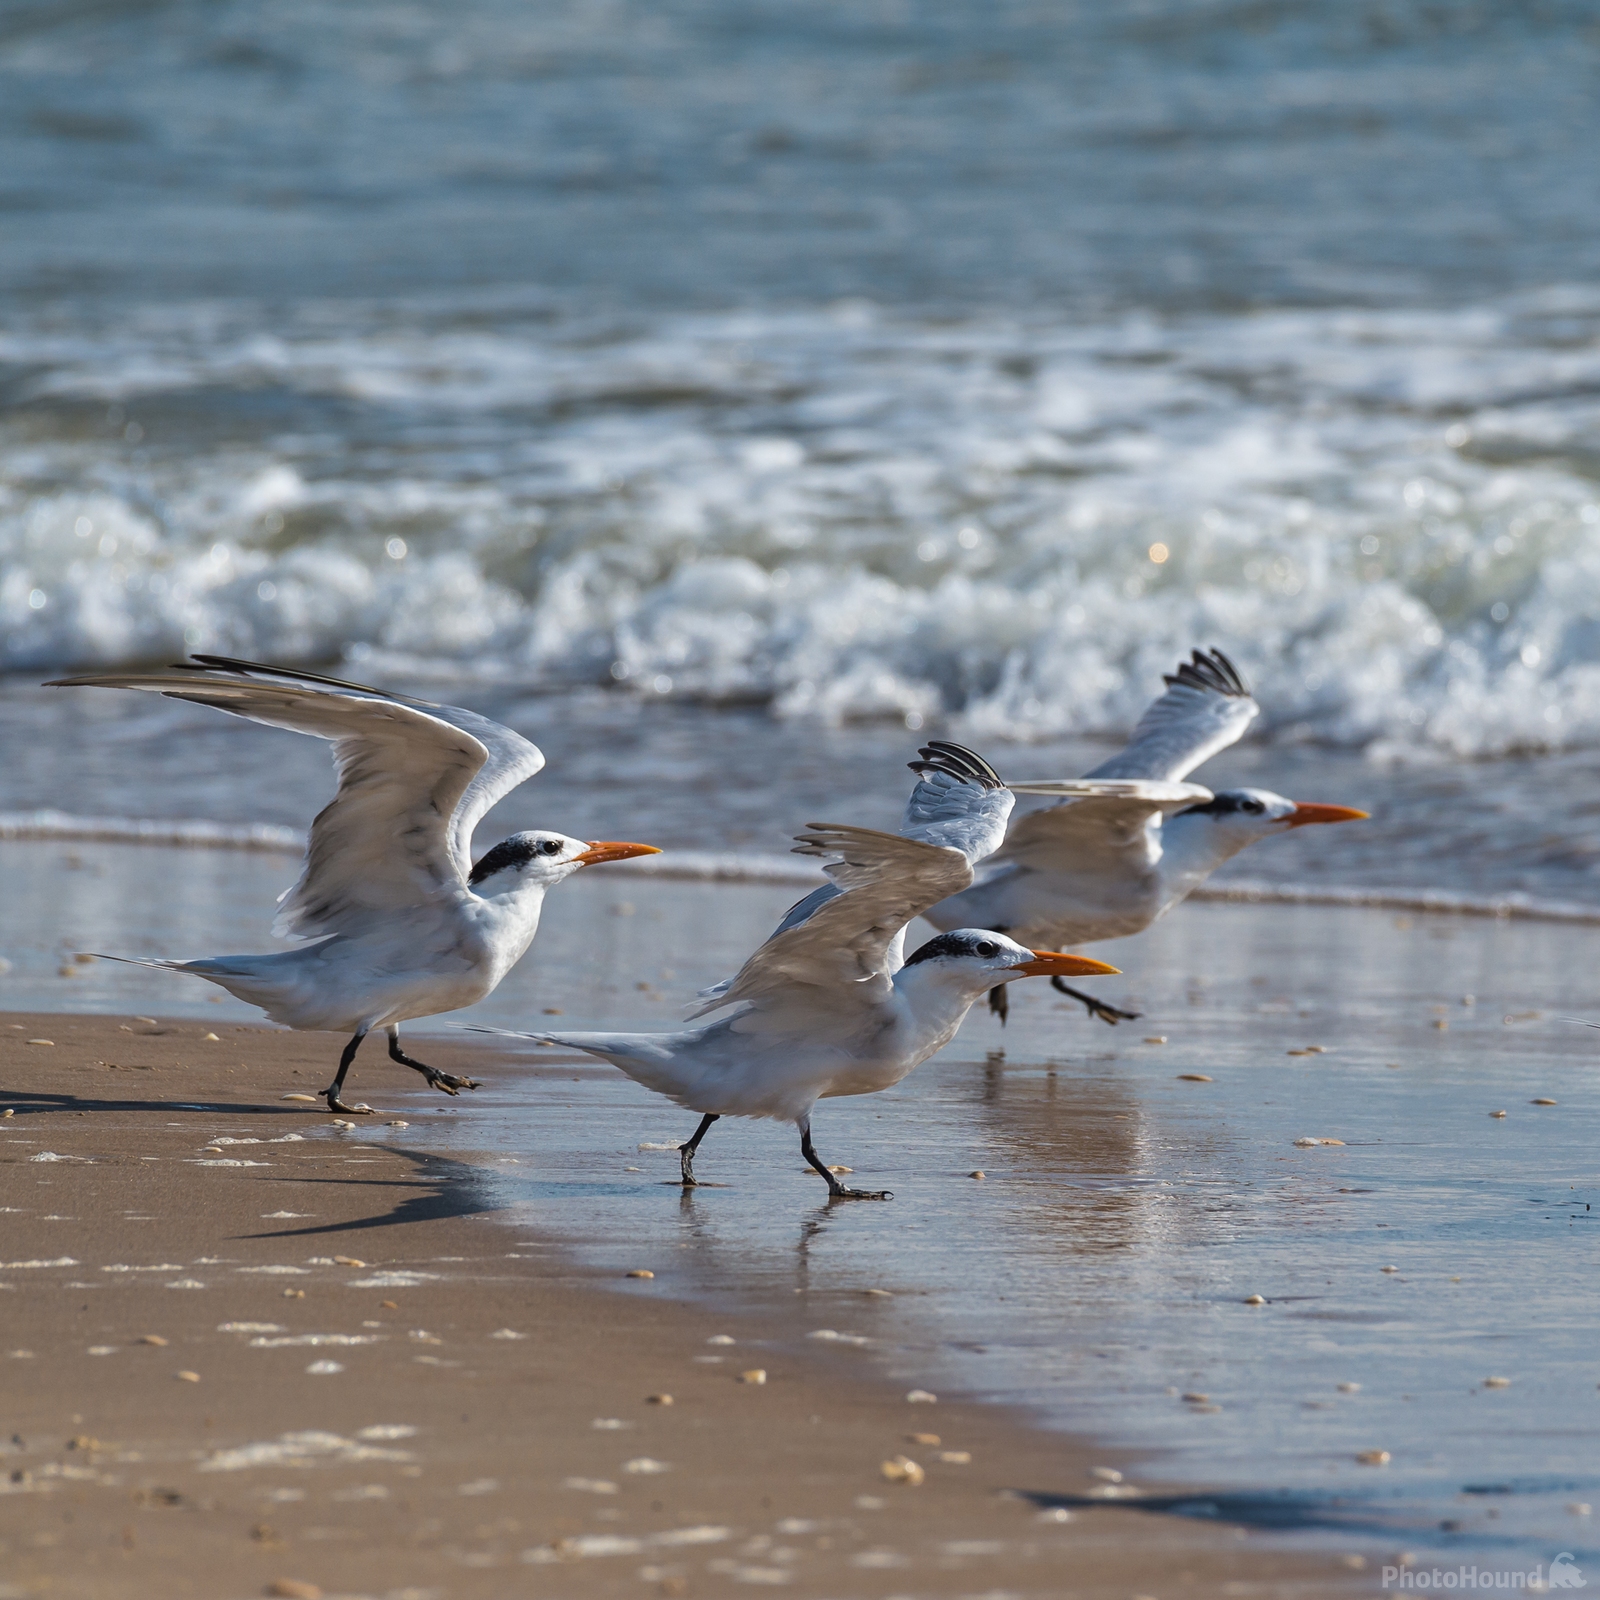 Image of Padre Island National Seashore by Sue Wolfe